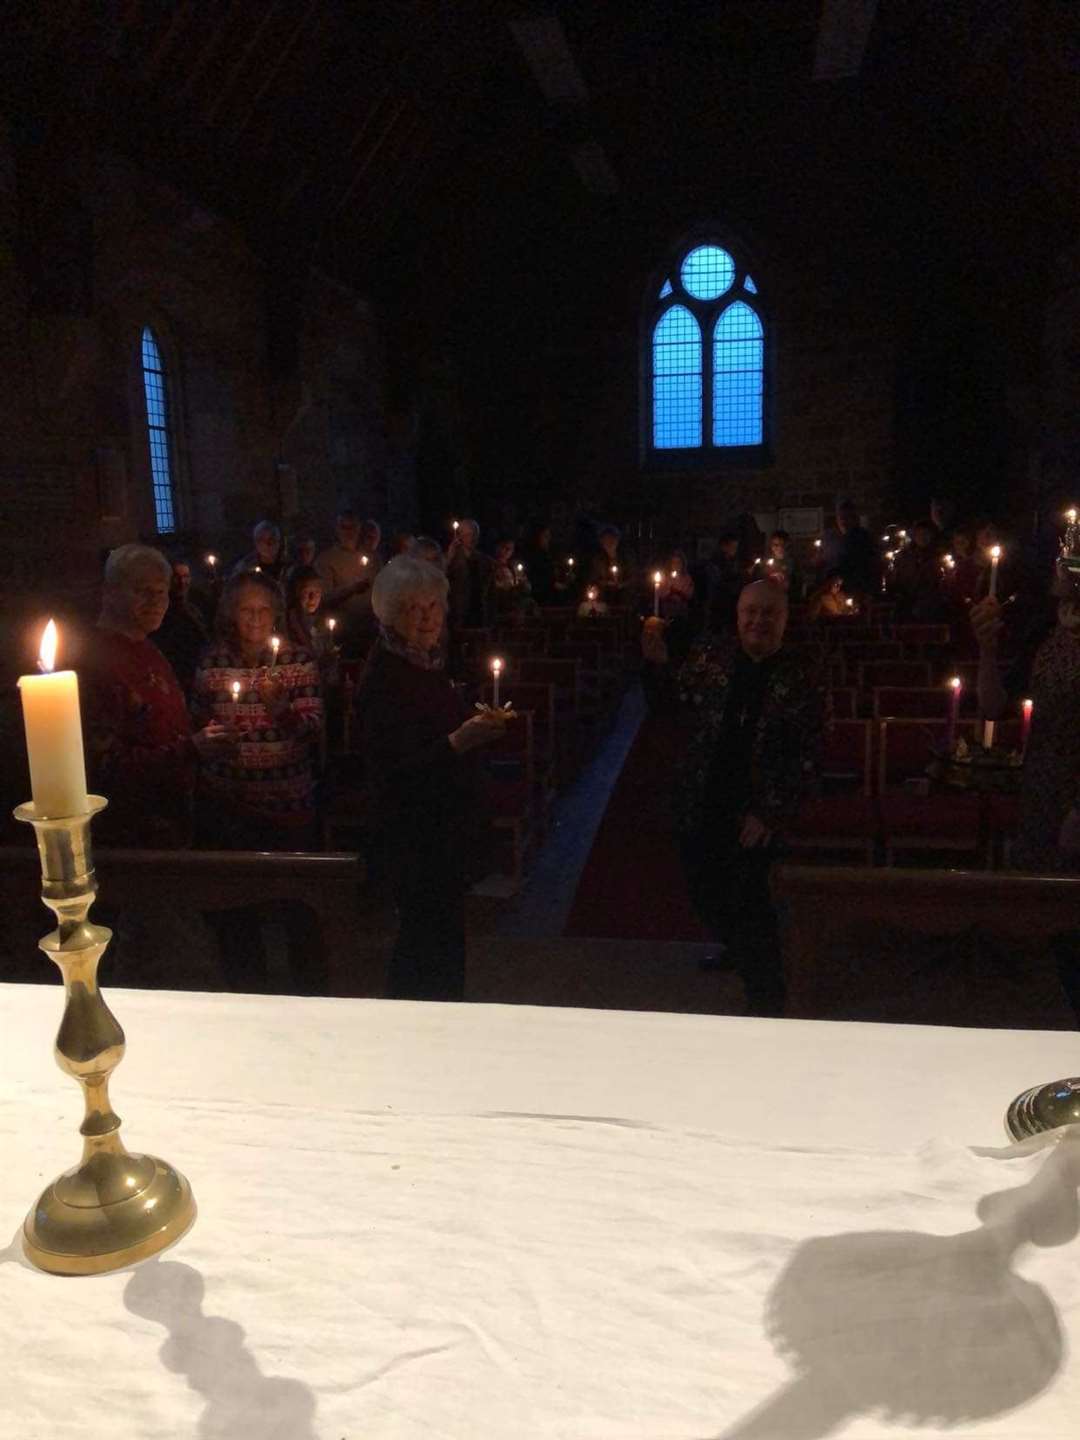 The Christingle service was held on Sunday, December 17.